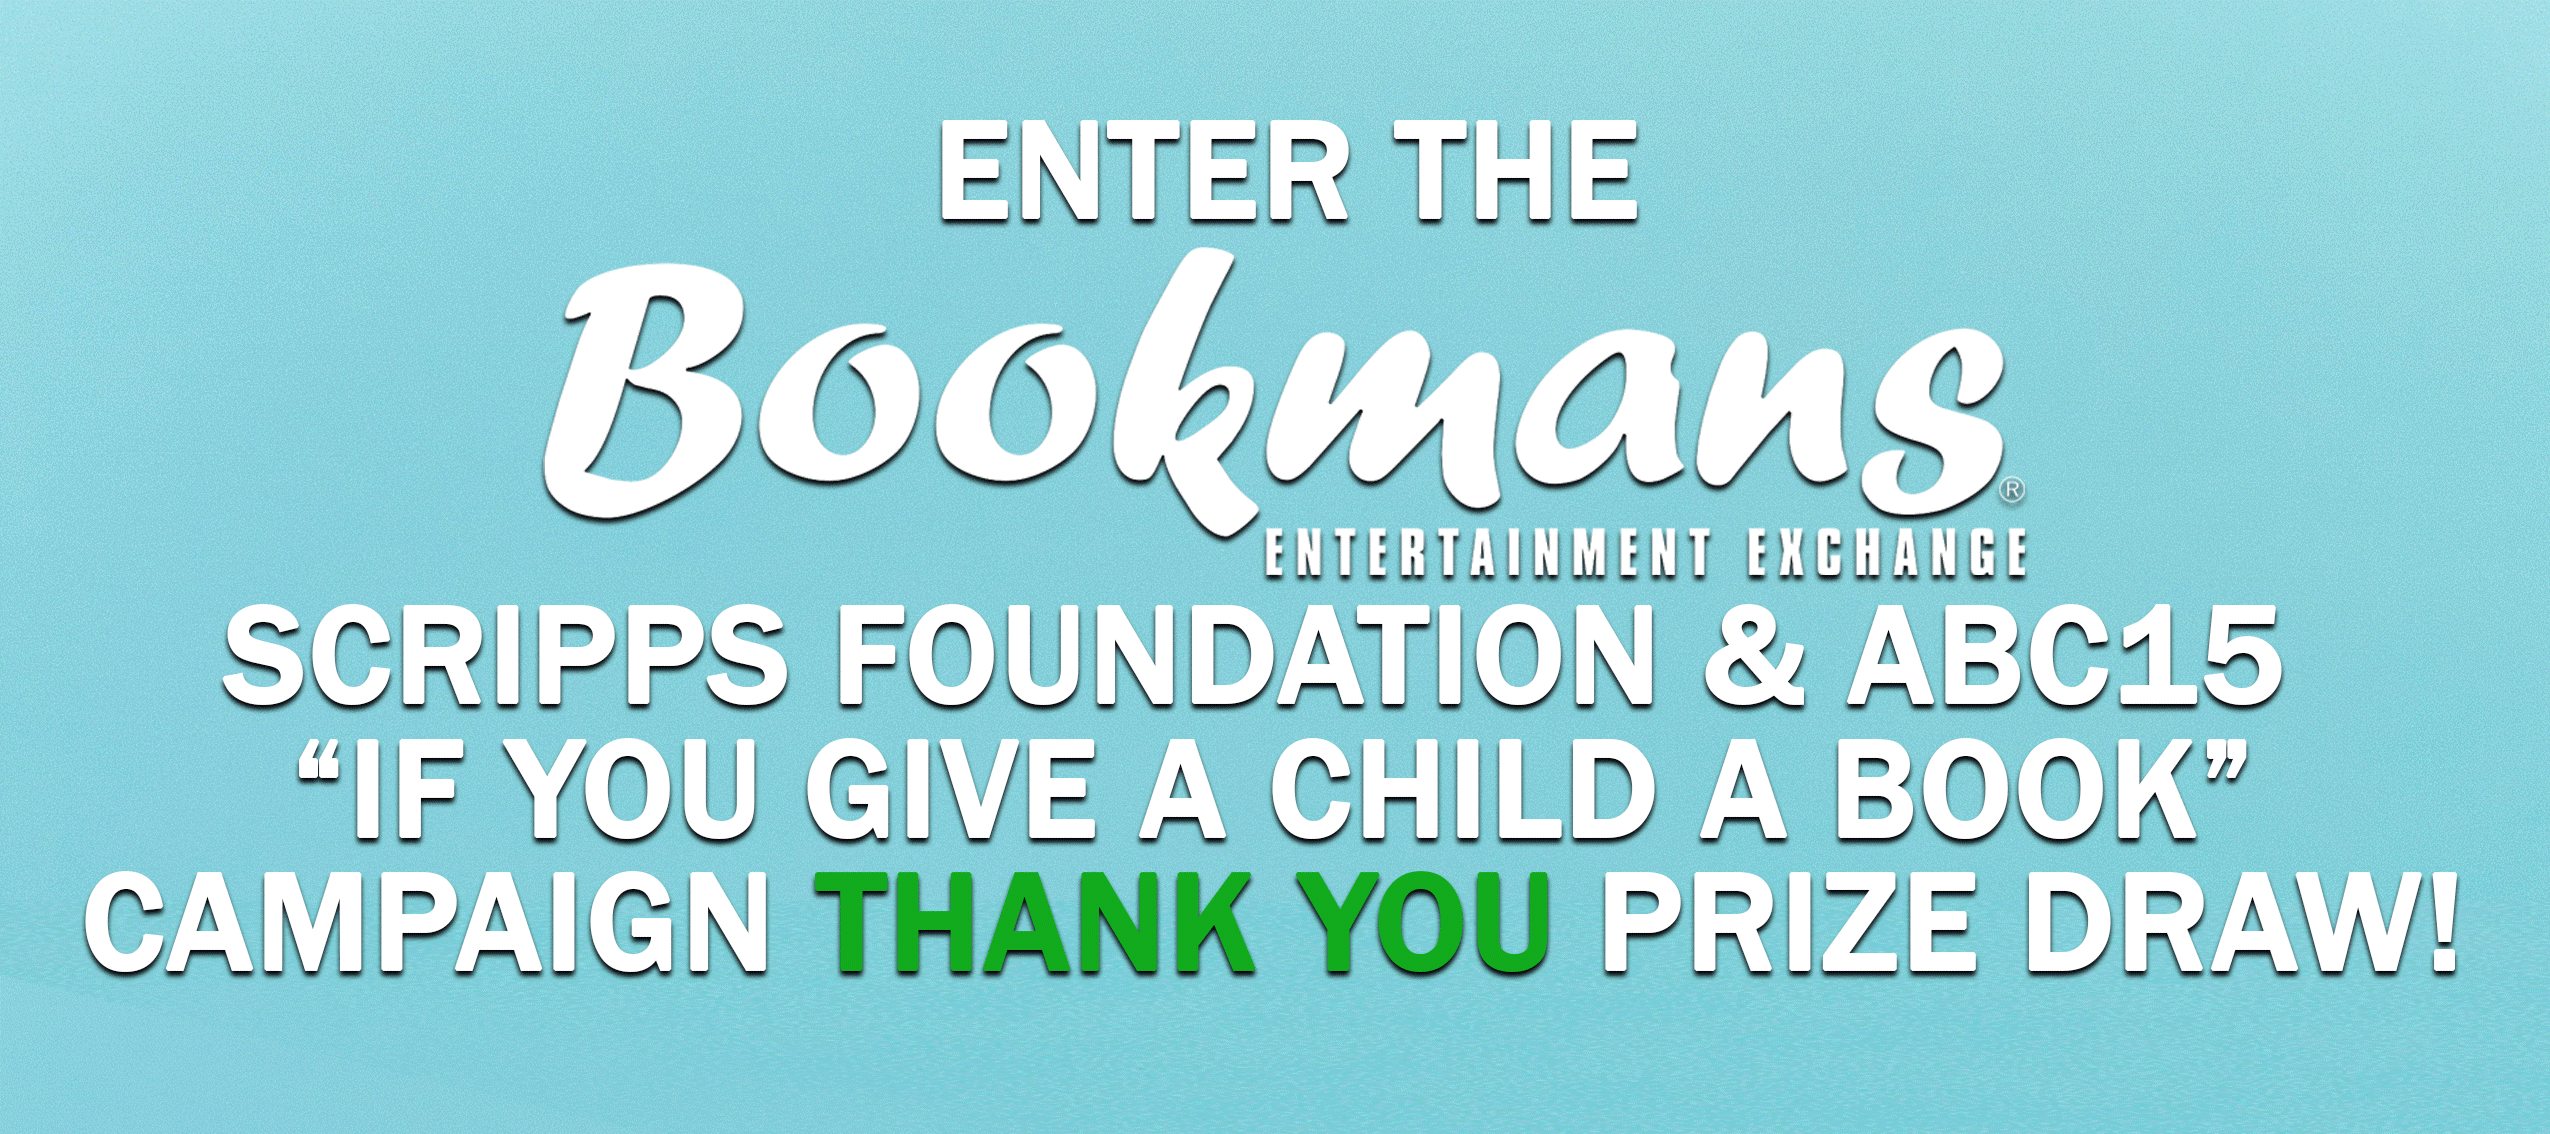 if you give a child a book entry information